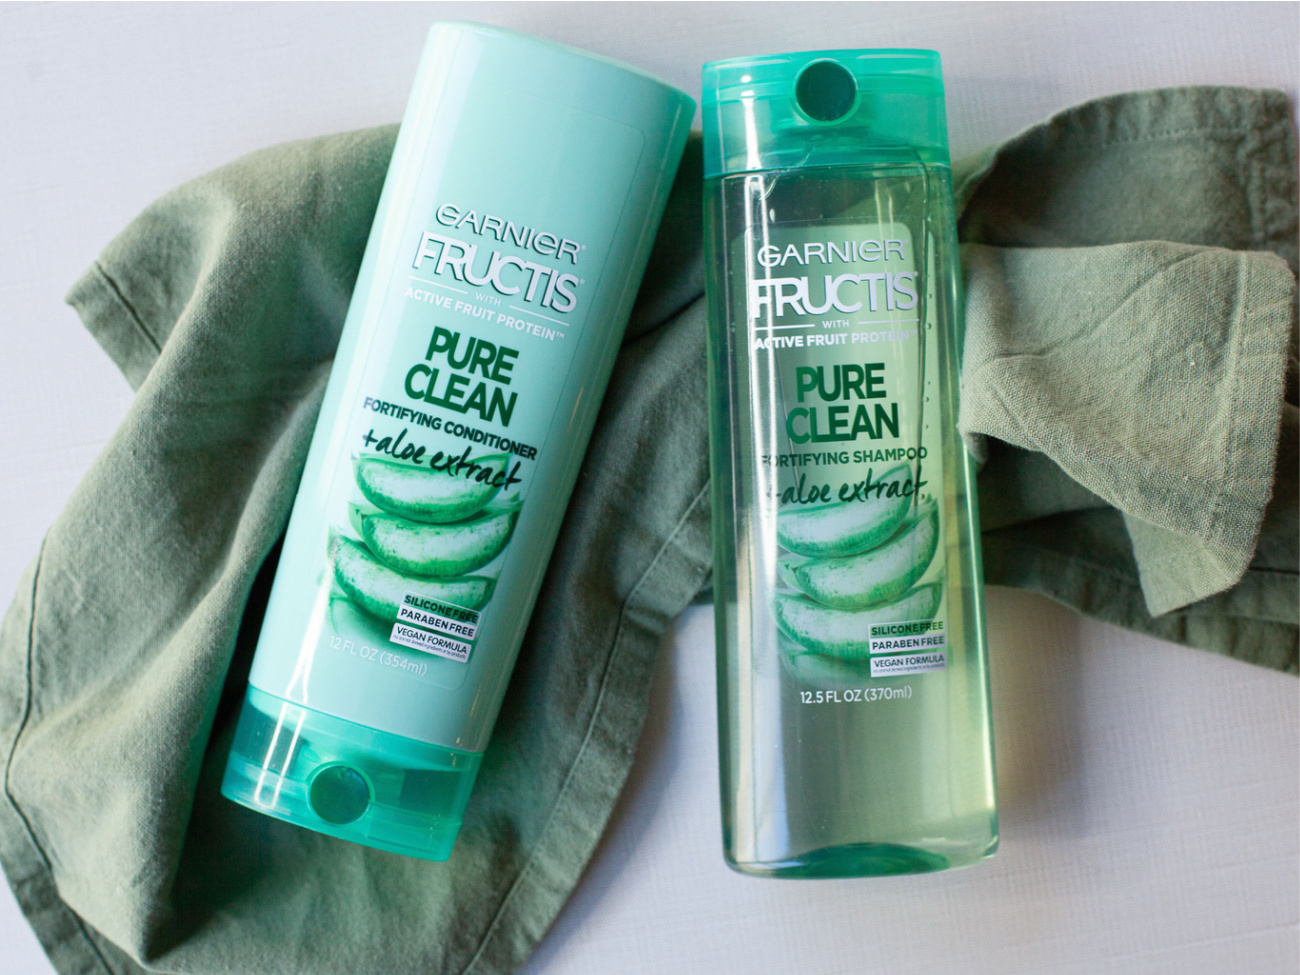 Garnier Fructis Hair Care Just $1.50 Per Bottle At Publix With The New Coupon! on I Heart Publix